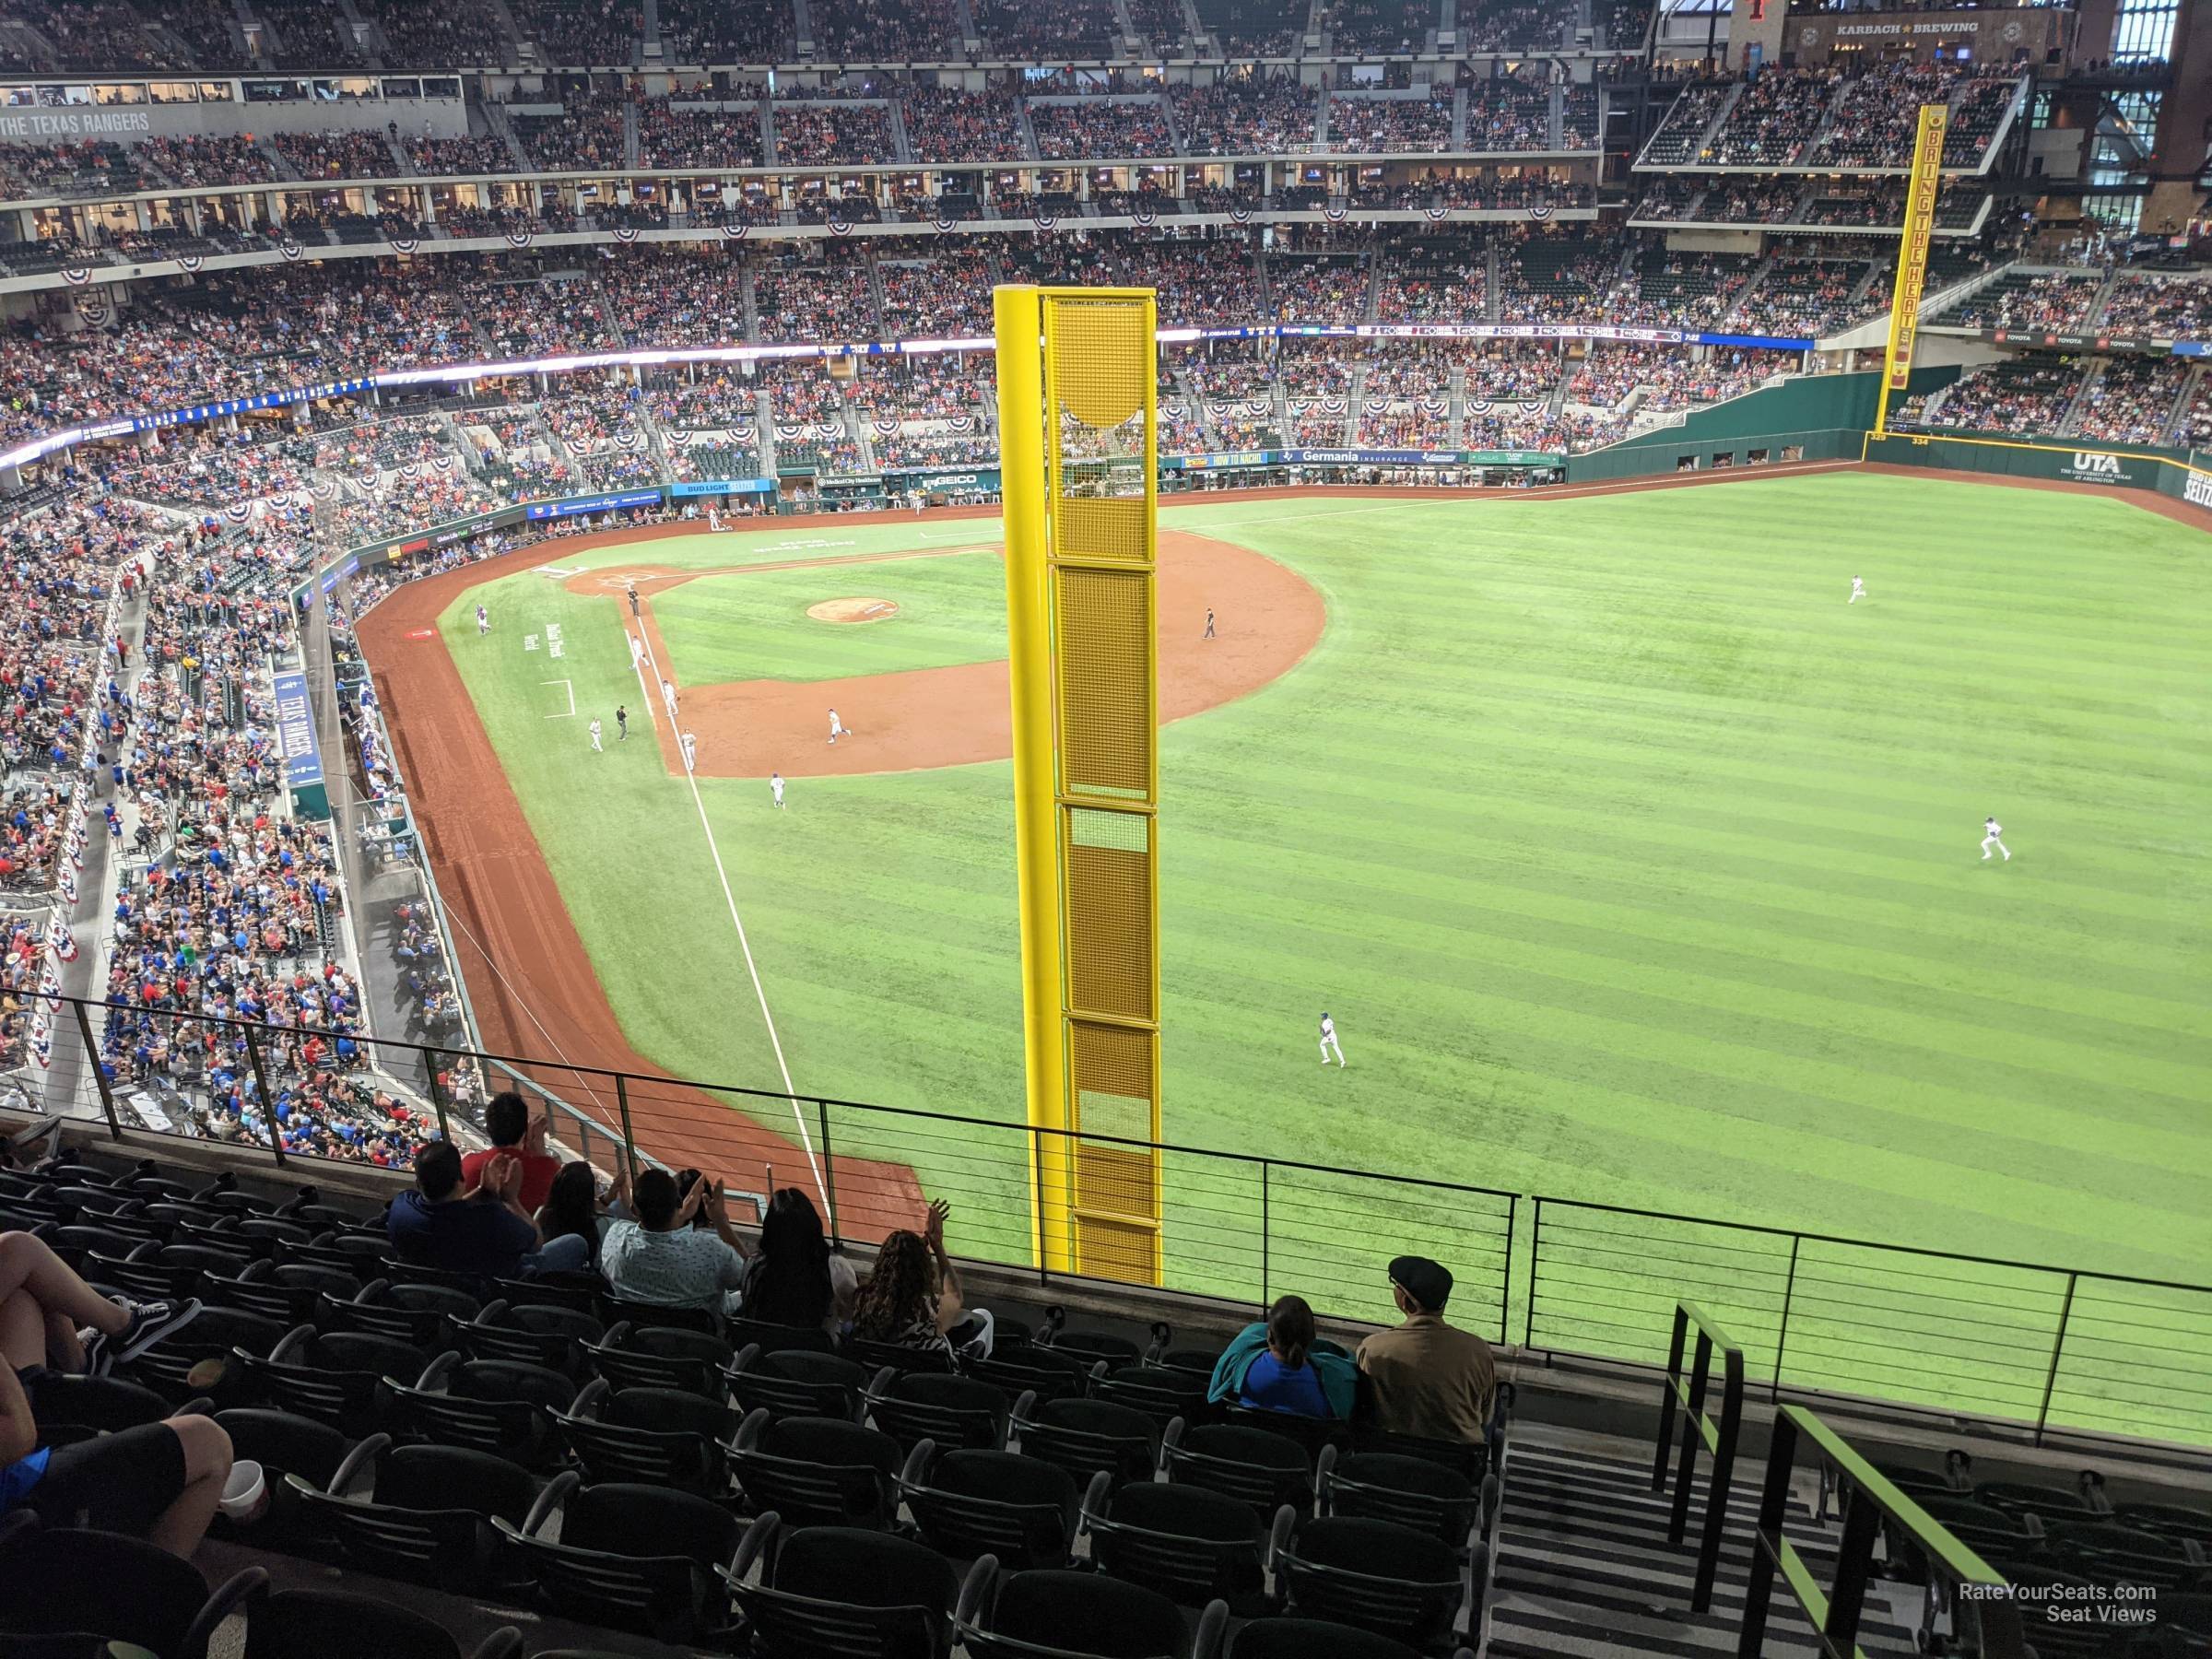 section 231, row 8 seat view  - globe life field